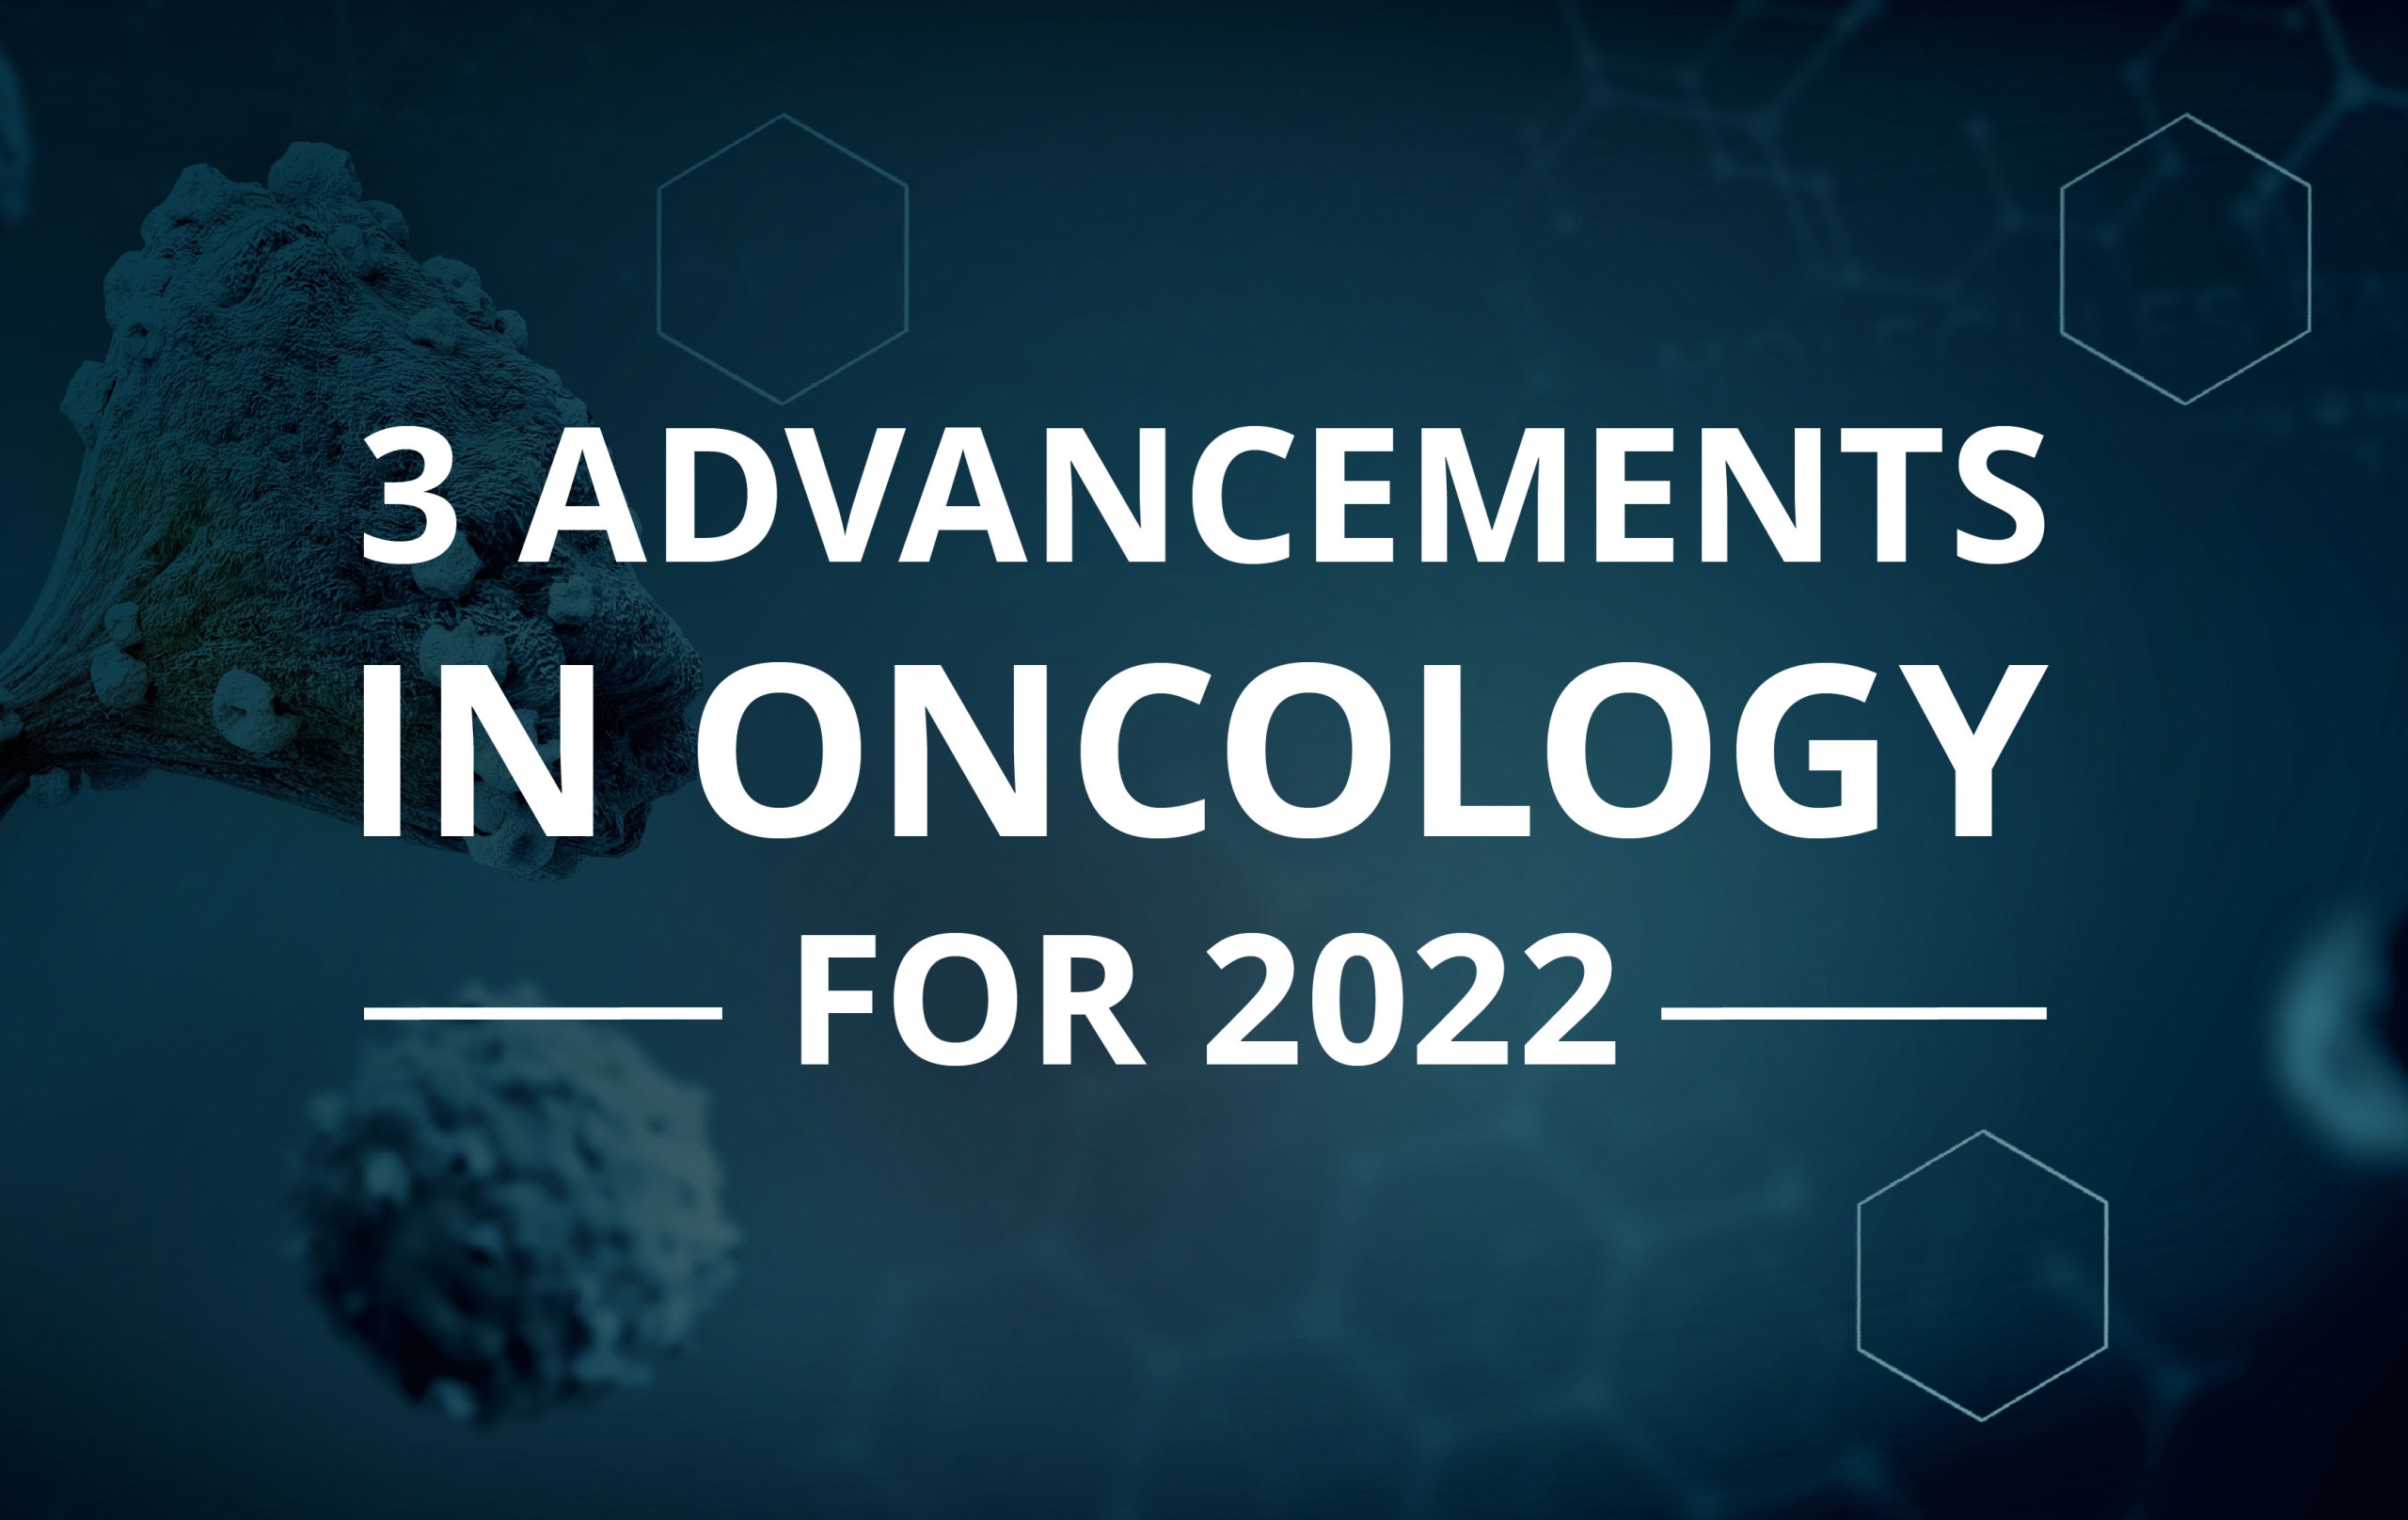 image for 3 Advancements in Oncology for 2022